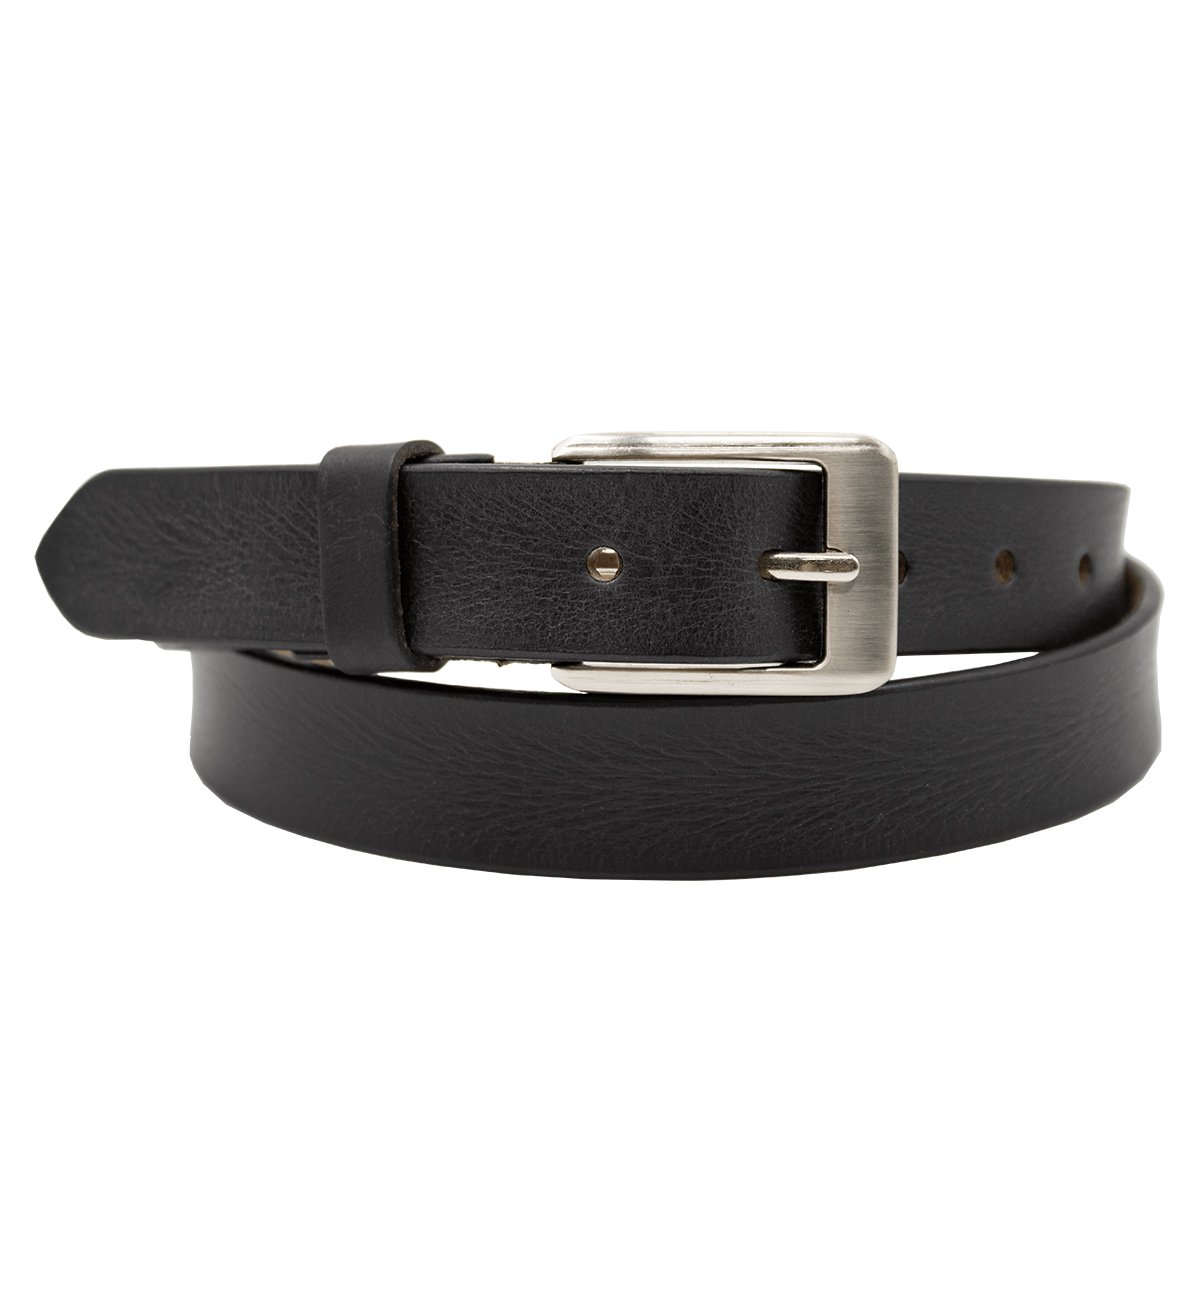 Men's Formal Leather Belt with Heavy Silver Buckle - #BT-1601-2